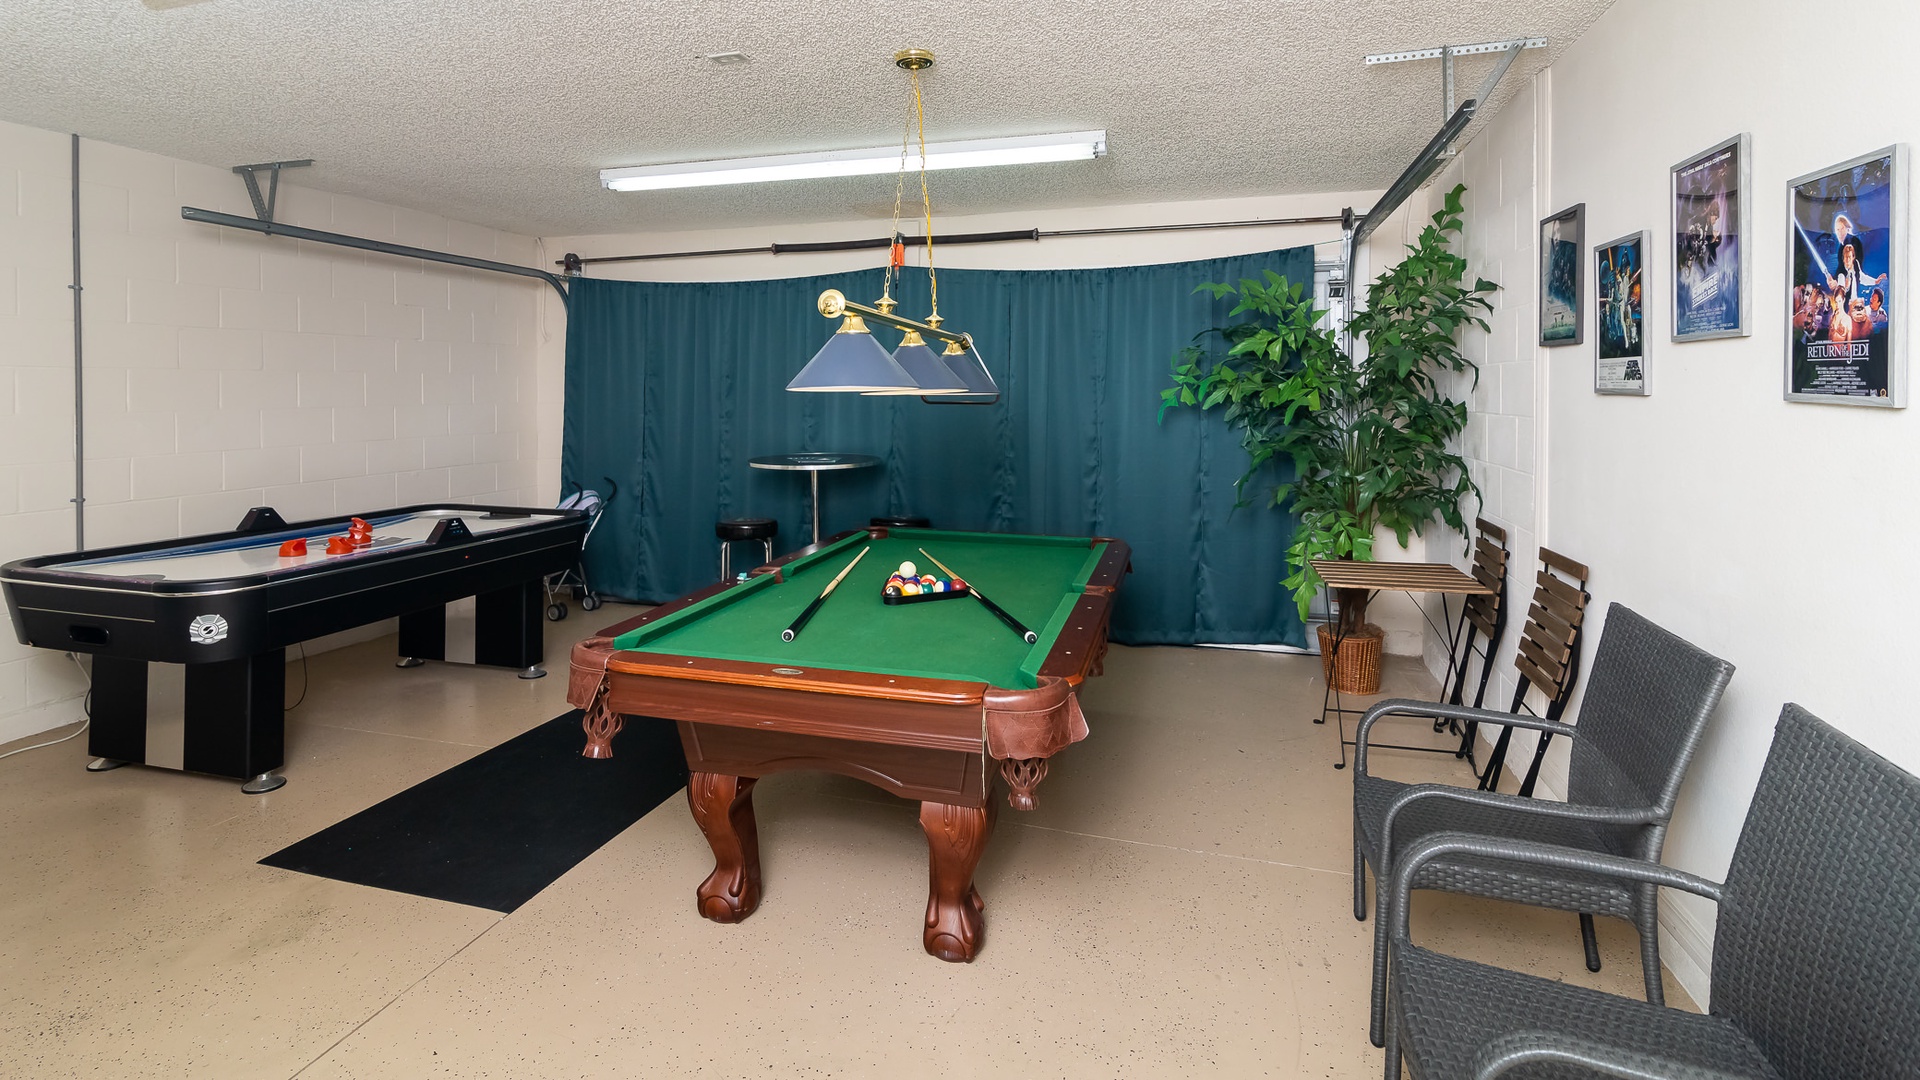 Game room with billiards, darts, air hockey and more!